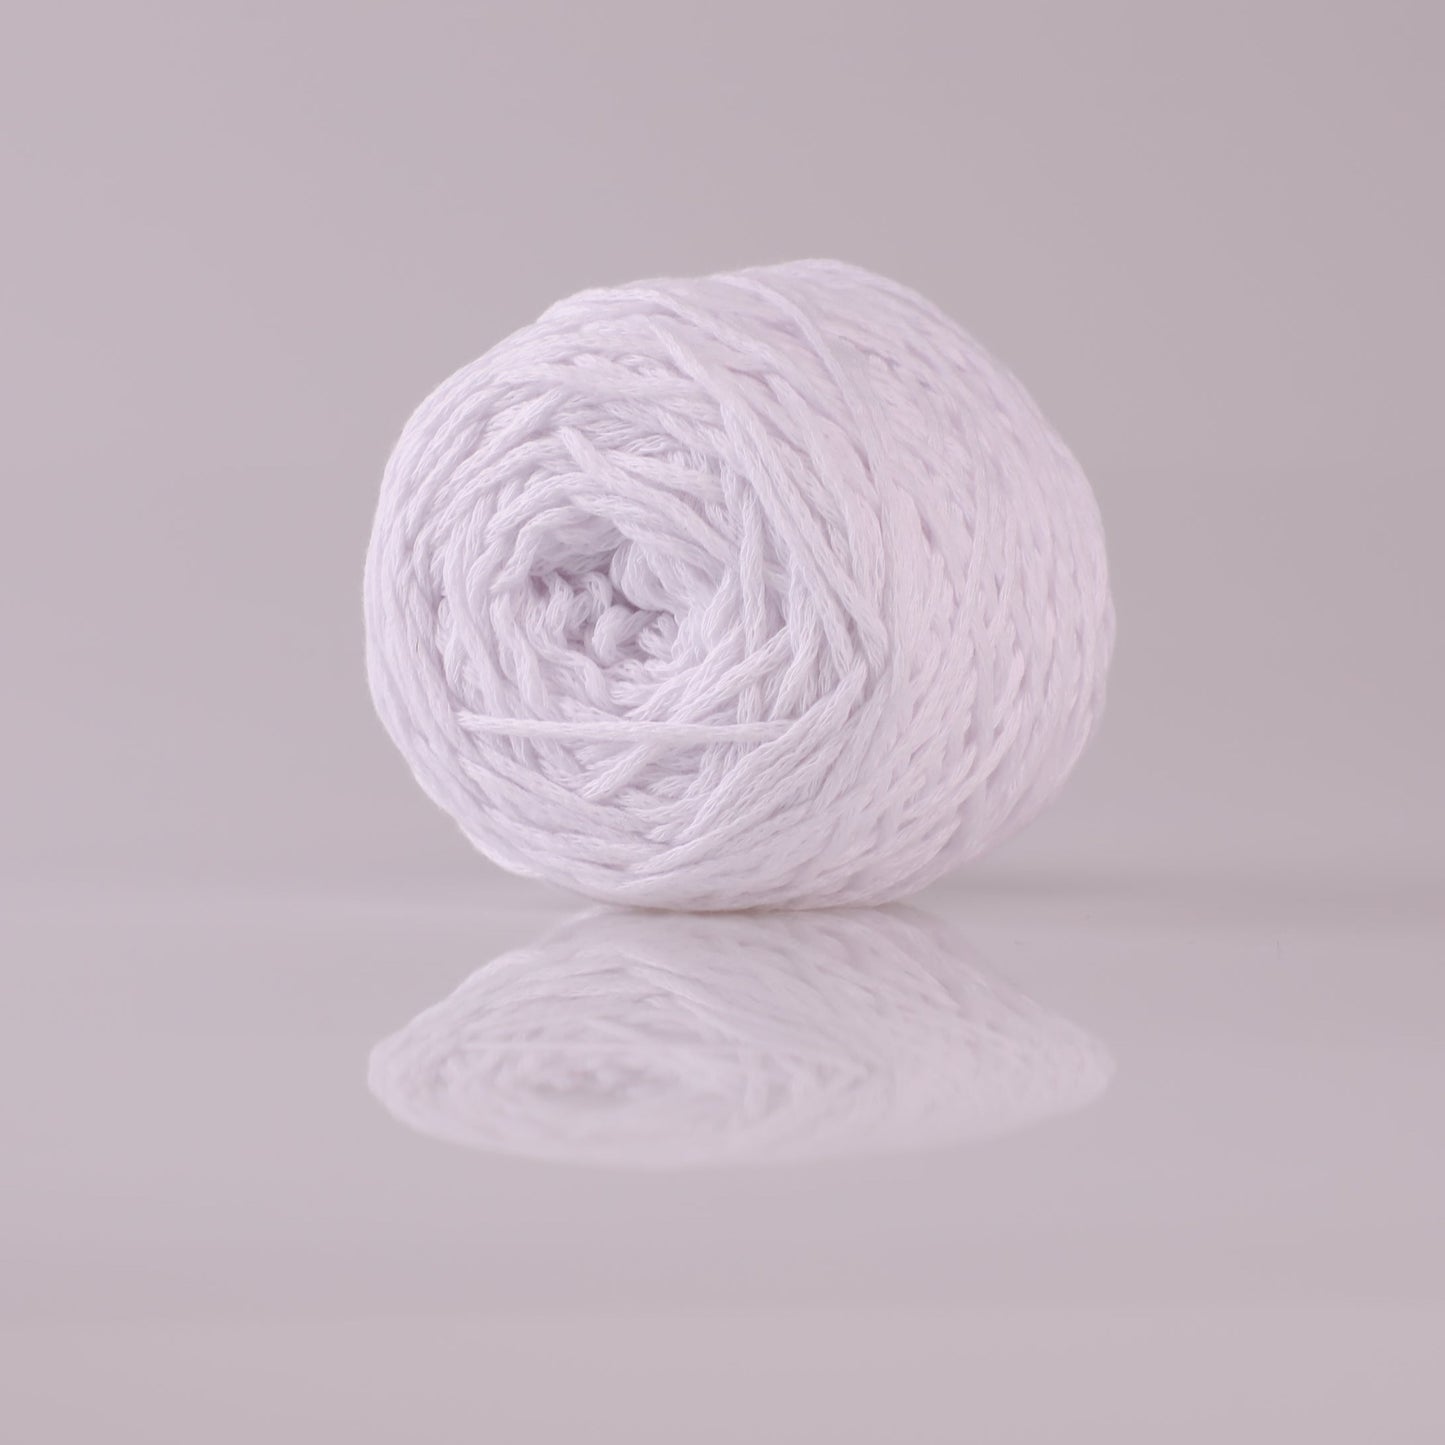 100% Cotton Tube Yarn, Cord Yarn 2mm, 21 Colors, Good for Bag & Goods - White